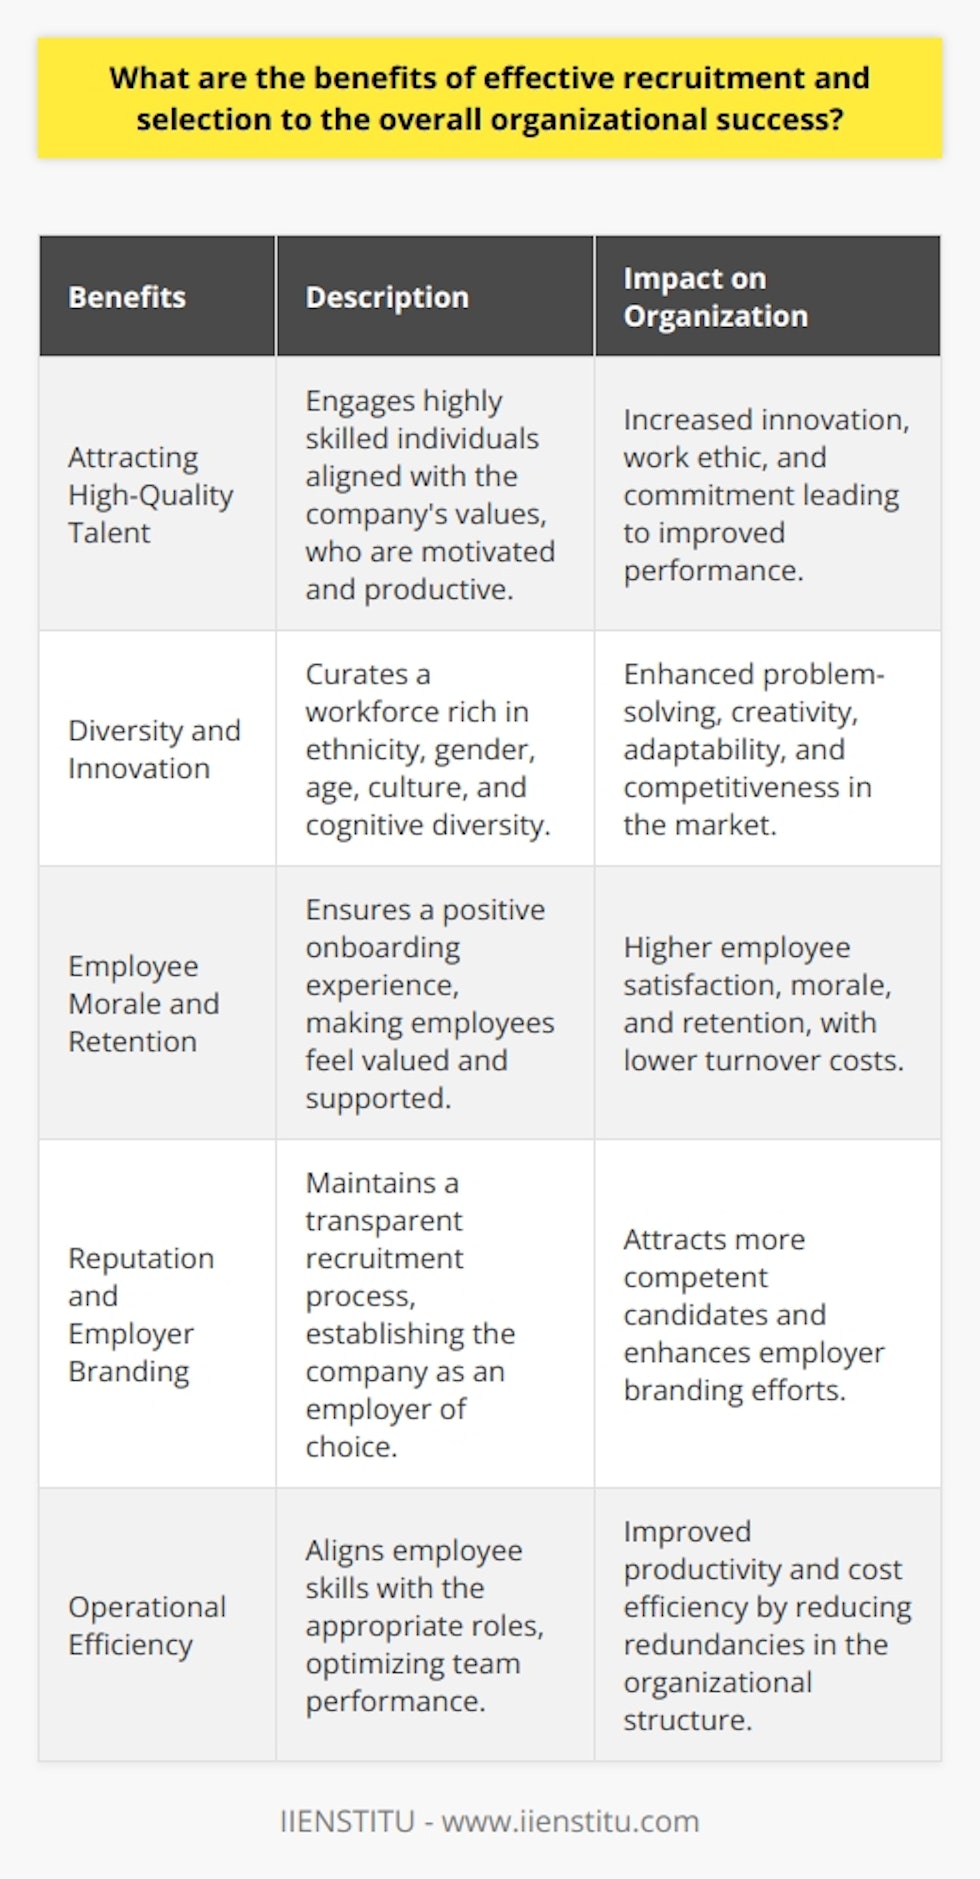 Effective recruitment and selection processes are integral to organizational success. By carefully choosing the right candidates for the right positions, the benefits extend far beyond just filling vacancies. These processes yield positive outcomes across various domains within an organization, bolstering its overall growth and competitive edge. Let's delve into some of the distinct advantages that effective recruitment and selection offer.**Attracting High-Quality Talent**An organization that prioritizes effective recruitment is positioned to attract the best talent in the market. This translates into employees who exhibit higher levels of engagement, motivation, and productivity. High-quality candidates are typically more aligned with the company's values and objectives, which means they are more invested in driving the organization forward. They often bring innovative ideas, excellent work ethic, and a commitment to quality that can significantly enhance the organization's performance.**Diversity and Innovation**Another benefit of effective recruitment strategies is the ability to curate a diverse workforce. Diversity encompasses not just ethnicity and gender but also age, cultural background, educational experiences, and cognitive styles. By tapping into a diverse pool of talents, organizations foster an environment brimming with unique perspectives and approaches to problem-solving. This diversity fosters innovation and can propel the development of creative solutions, ultimately boosting the organization's adaptability and competitiveness in the marketplace.**Employee Morale and Retention**When recruitment and selection are handled with care, new hires are more likely to feel valued and supported from the outset. This positive onboarding experience can have a ripple effect – enhancing employee morale and increasing the chances of longer tenure within the company. A lower turnover rate not only reduces the costs associated with frequent hiring but also cultivates a more experienced and cohesive workforce.**Reputation and Employer Branding**An effective and transparent recruitment process strengthens an organization's reputation as an employer of choice, which, in turn, attracts even more competent candidates. This virtuous cycle solidifies the company's employer branding, positioning it as a desirable place to work and further streamlining future recruitment efforts.**Operational Efficiency**Effective recruitment and selection are also key to building teams that function efficiently. Aligning employee skills and roles ensures that each team member is well-equipped to perform their tasks effectively. This alignment helps eliminate unnecessary redundacies within the organization's structure, thus optimizing productivity and cost efficiency.In an ever-evolving job market, companies must place a premium on refining their recruitment and selection practices. IIENSTITU, as a forward-thinking institution rooted in education and professional development, understands the nuances of these processes. Effective recruitment and selection are not just about hiring; they are about fostering an environment that unlocks the potential of every employee, leading to a thriving and successful organization.